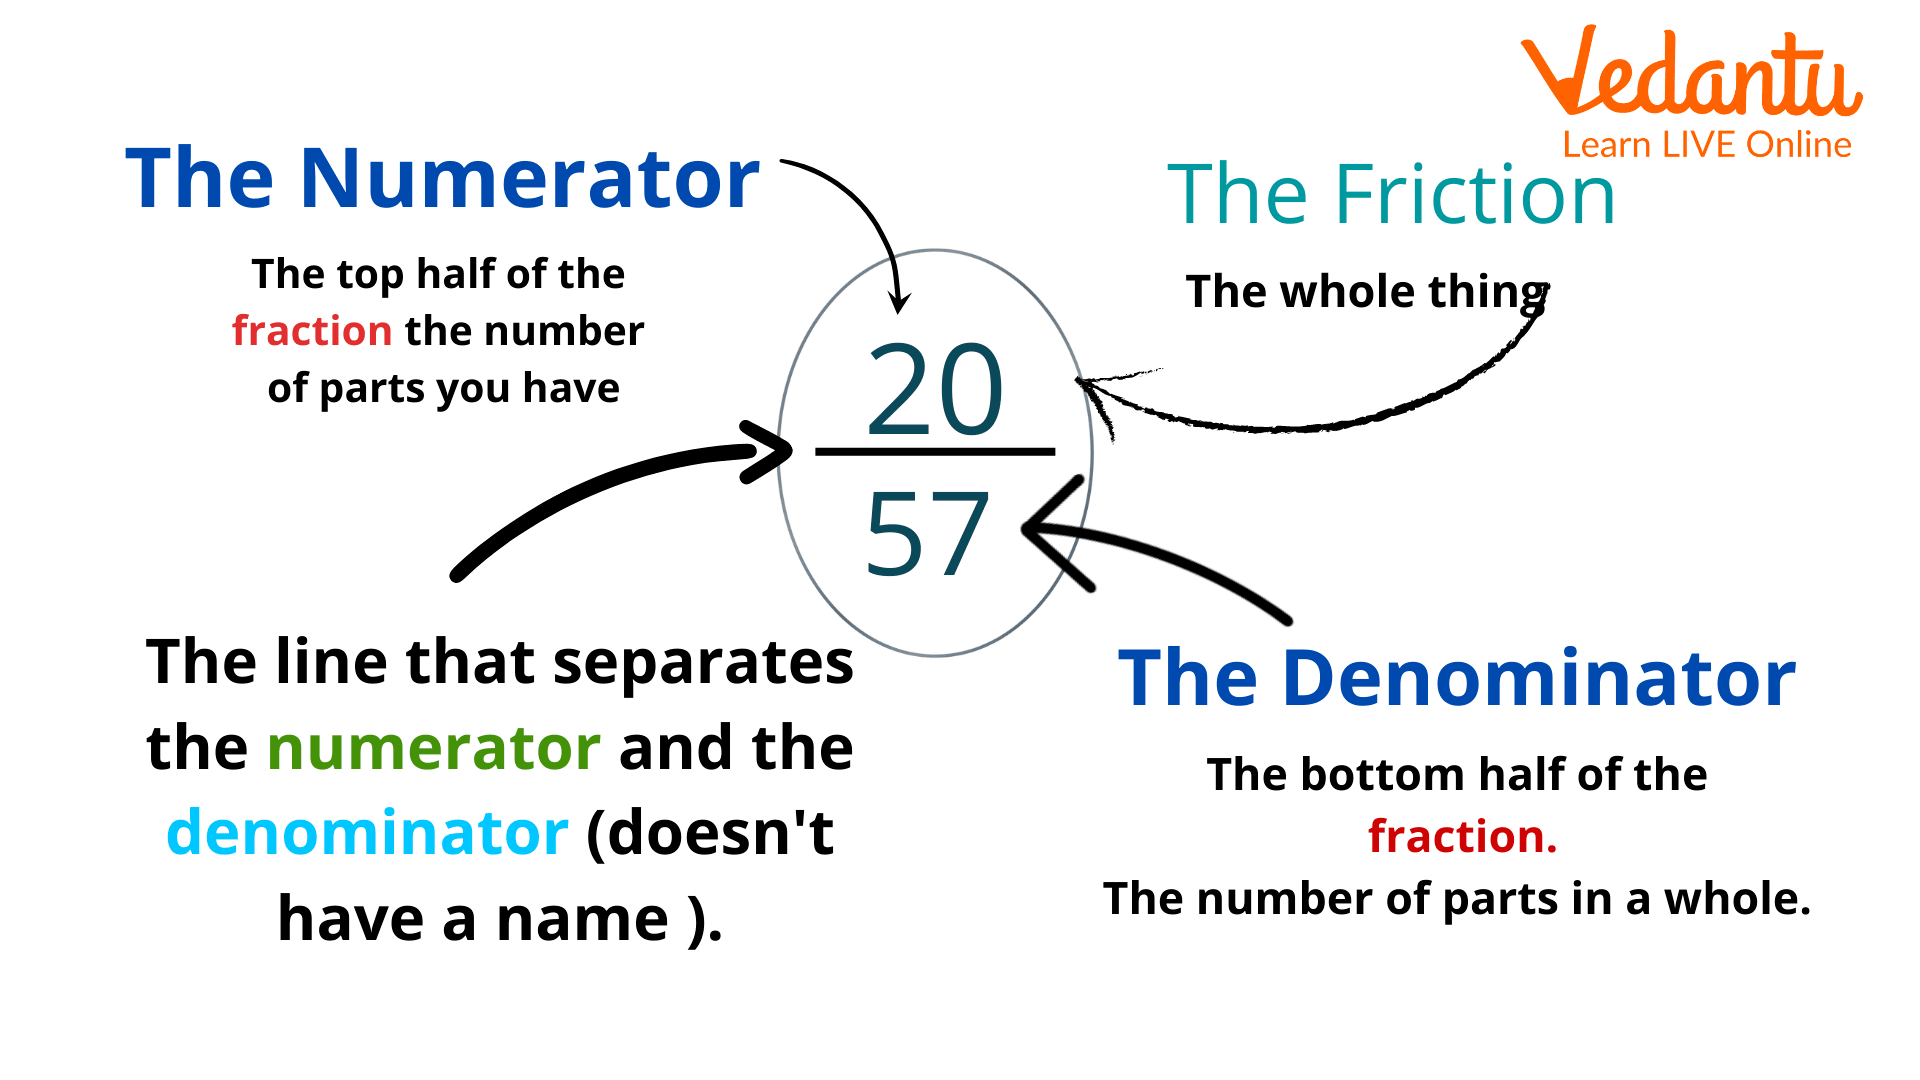 The fraction parts – the numerator and denominator